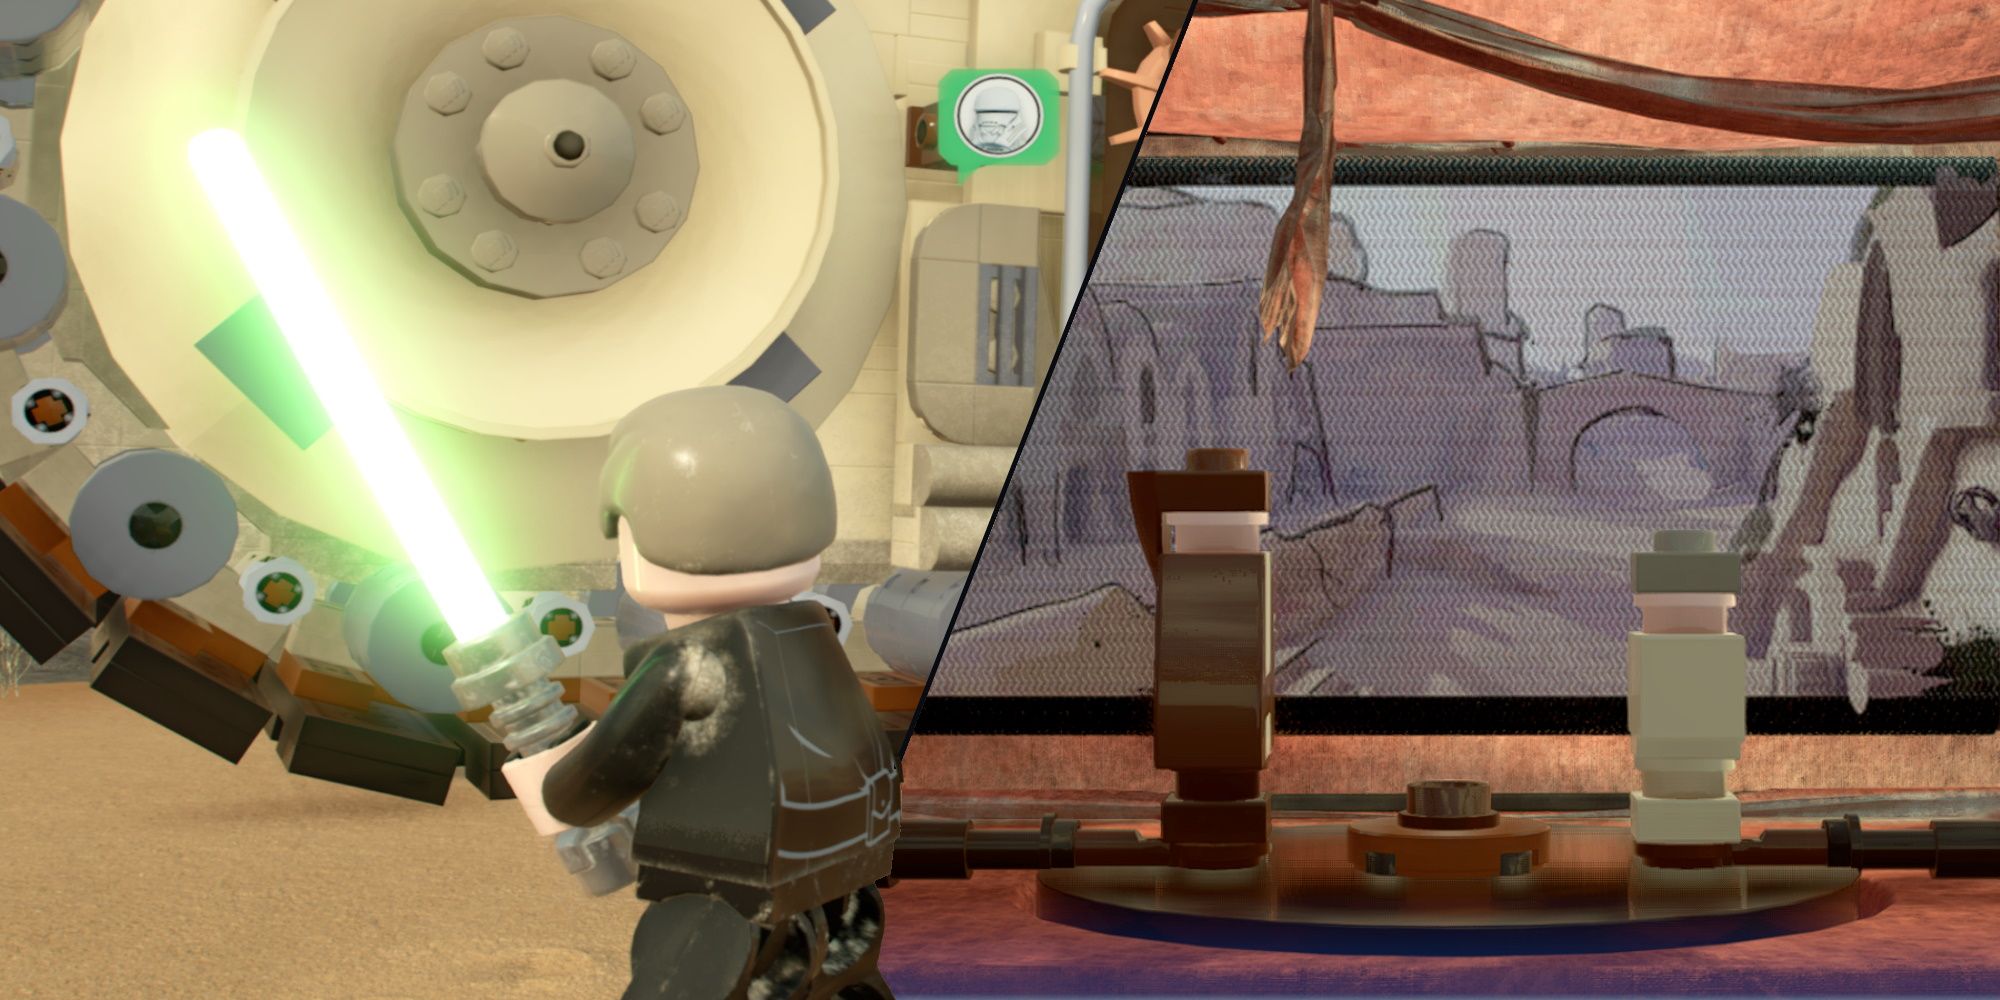 Split image showing Luke interacting with the Treader and the pantomime play